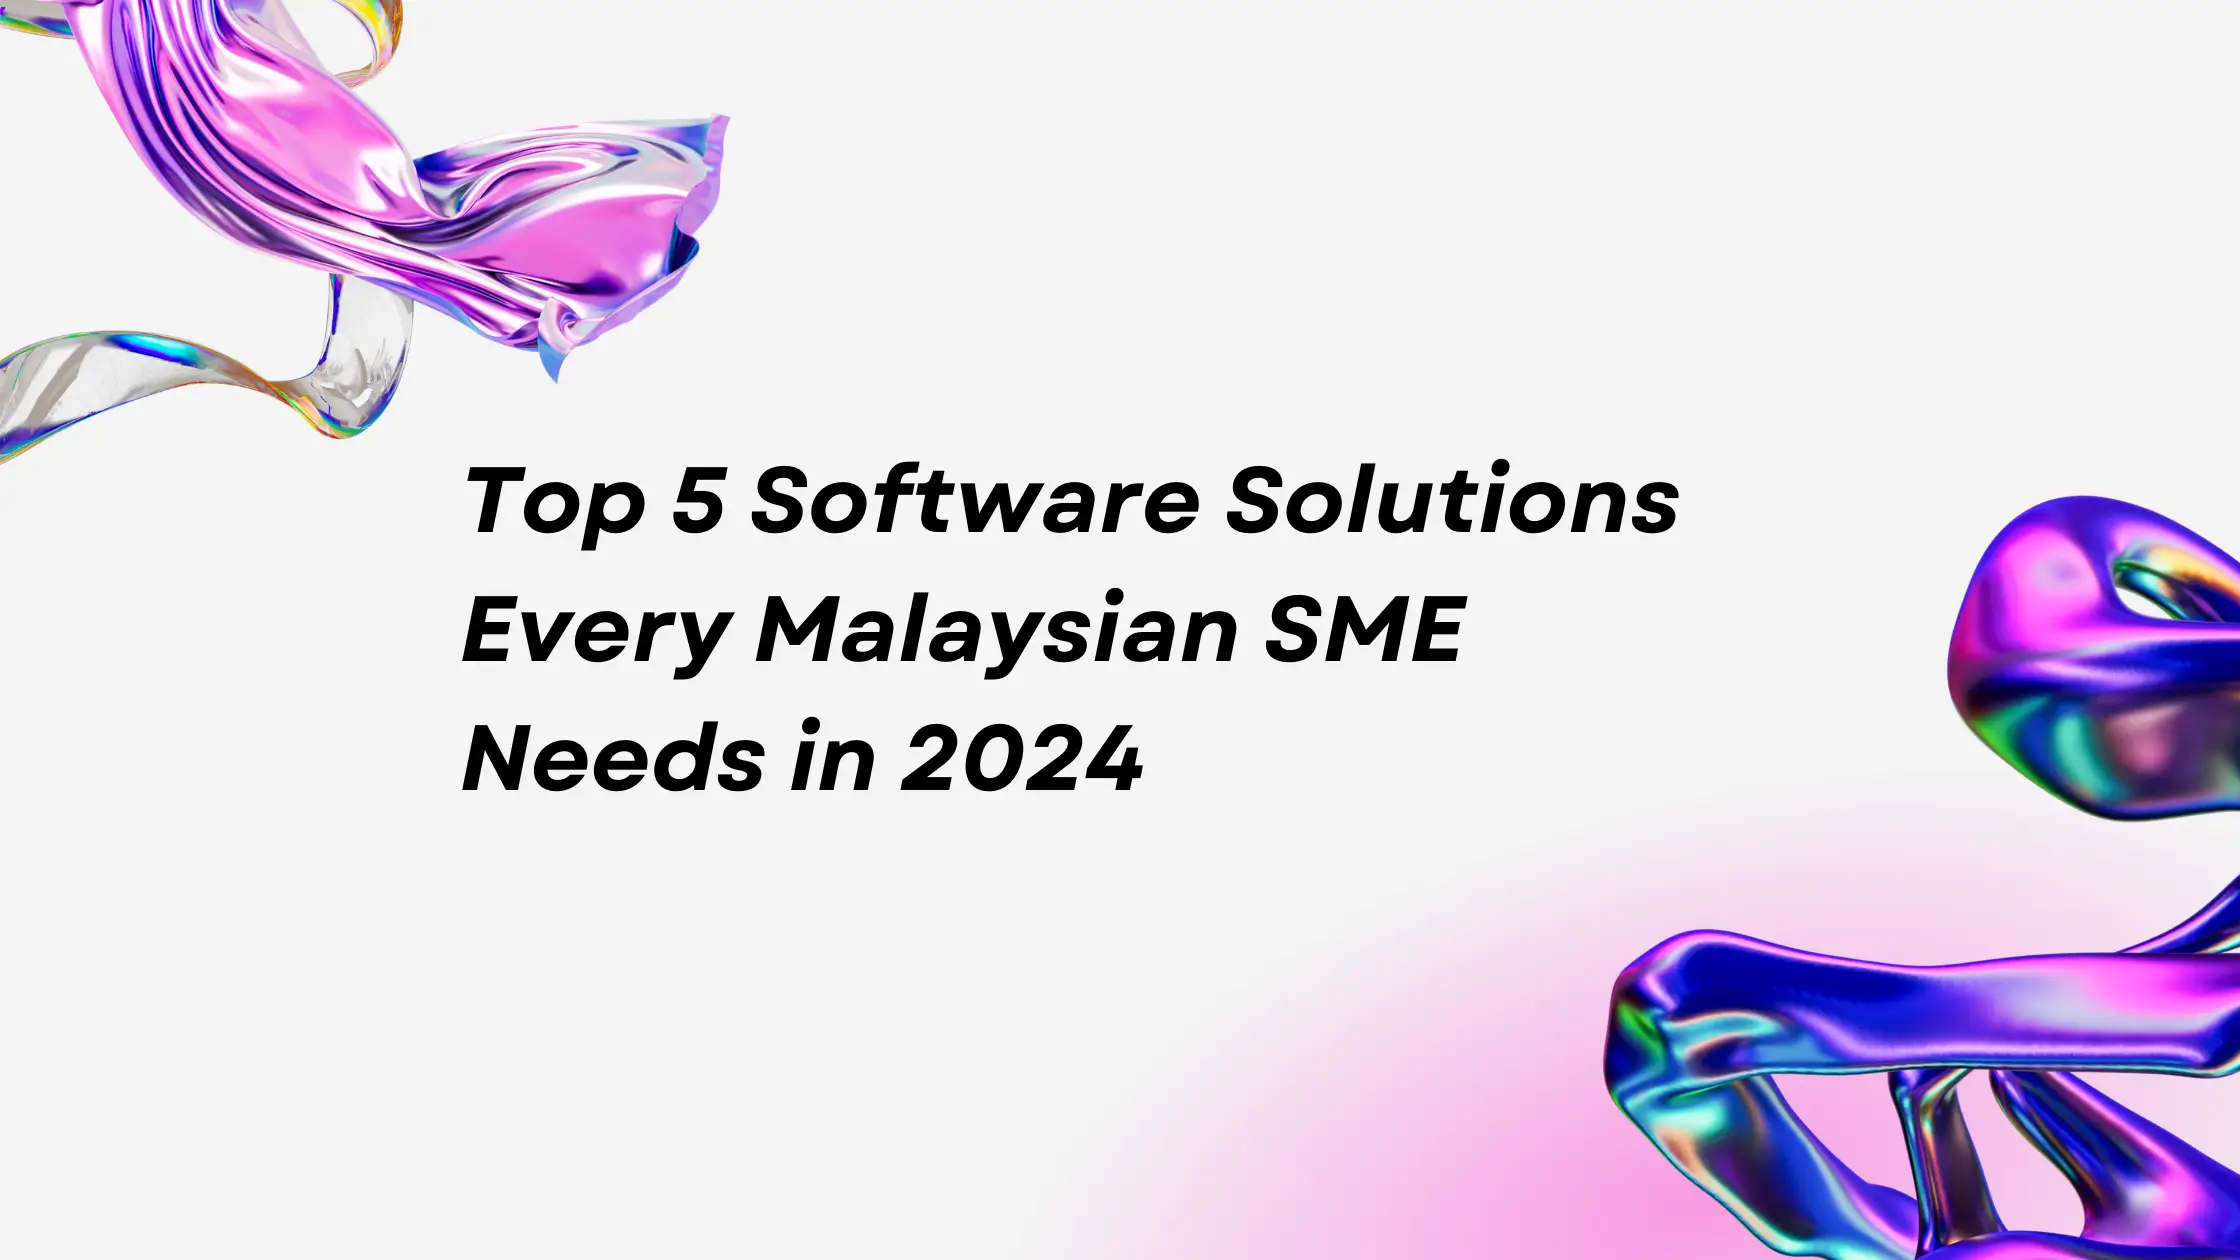 futuristic image with words top 5 software solutions empowering malaysian SMEs in 2024 written on it